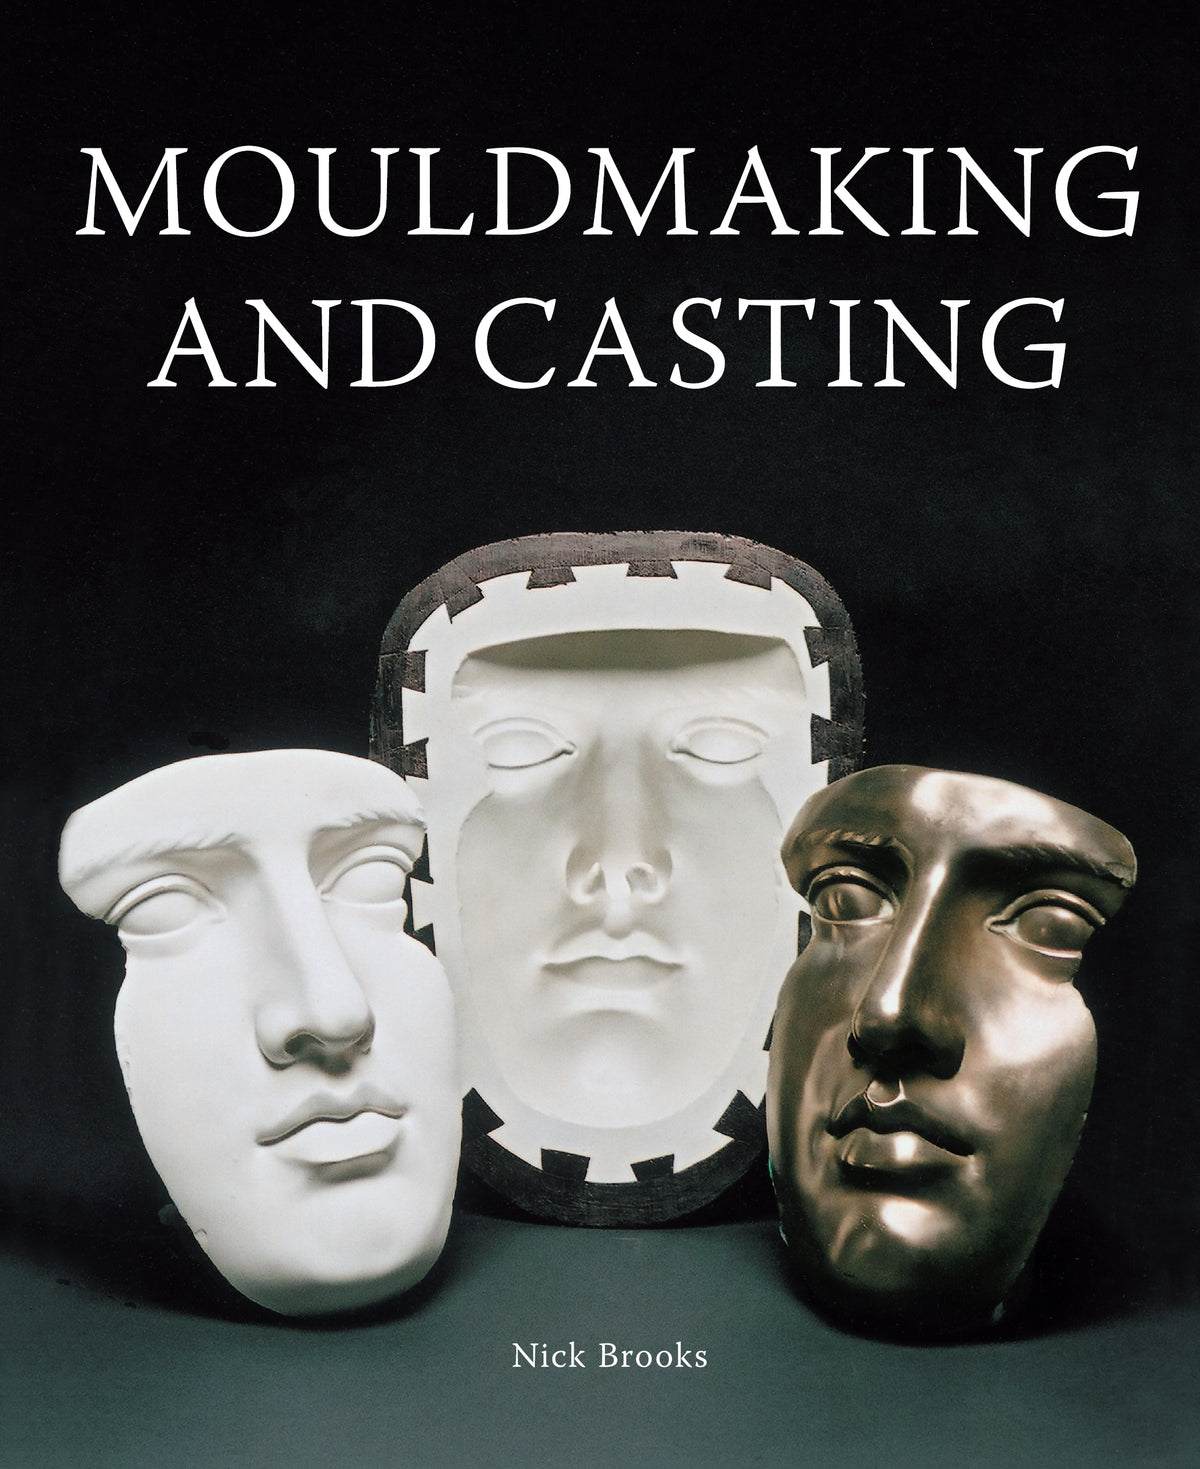 MouldMaking and Casting